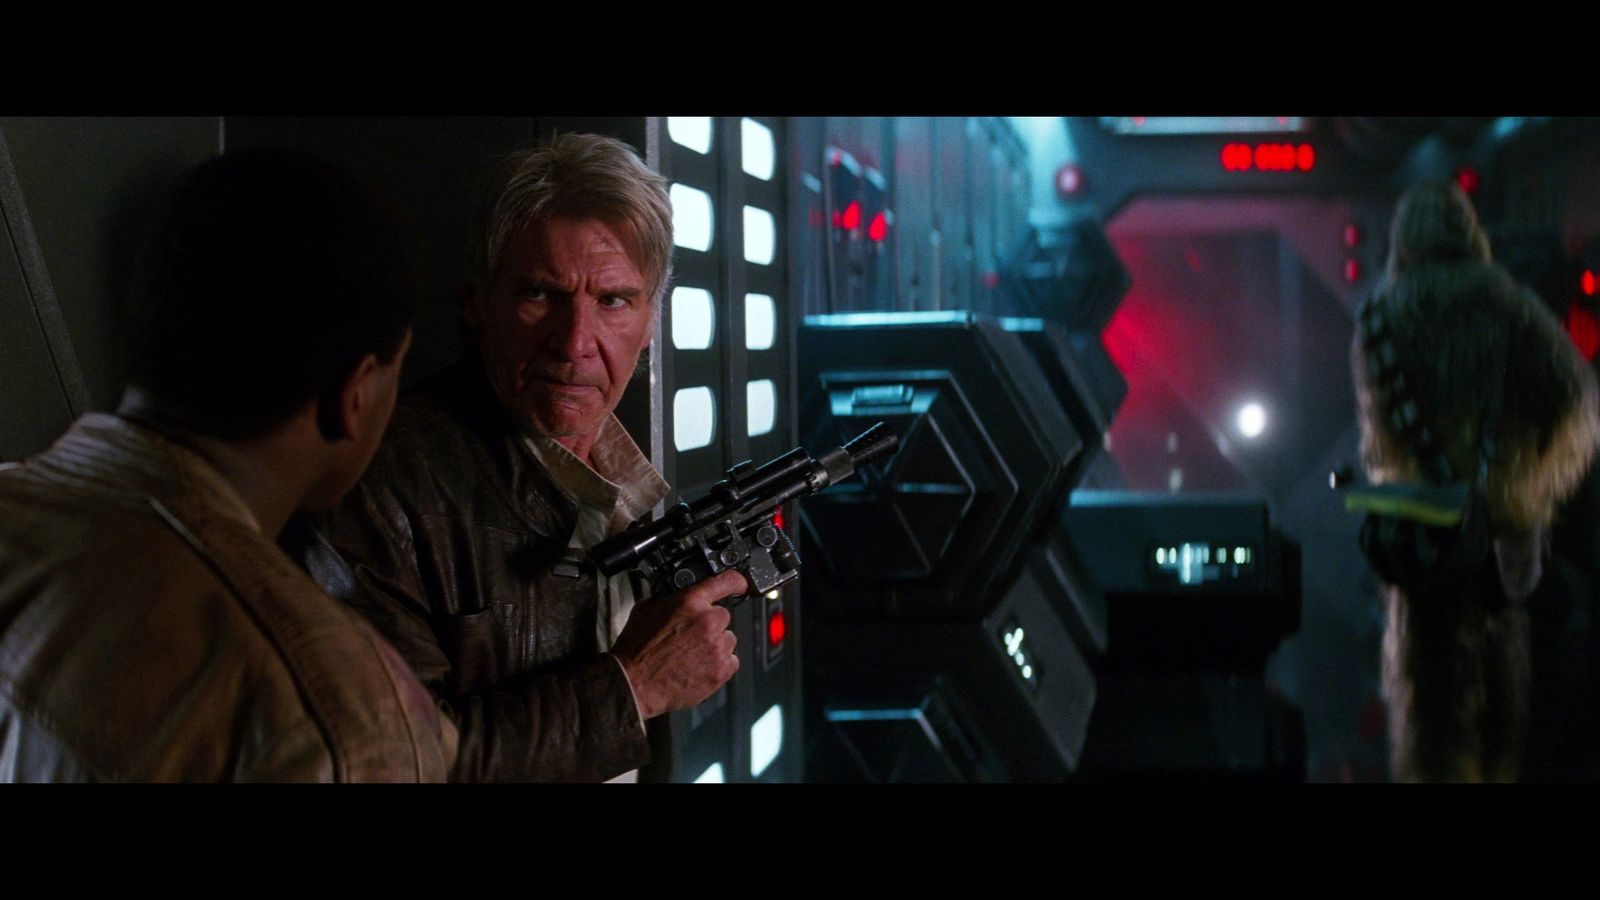 Harrison Ford as Han Solo in Force Awakens